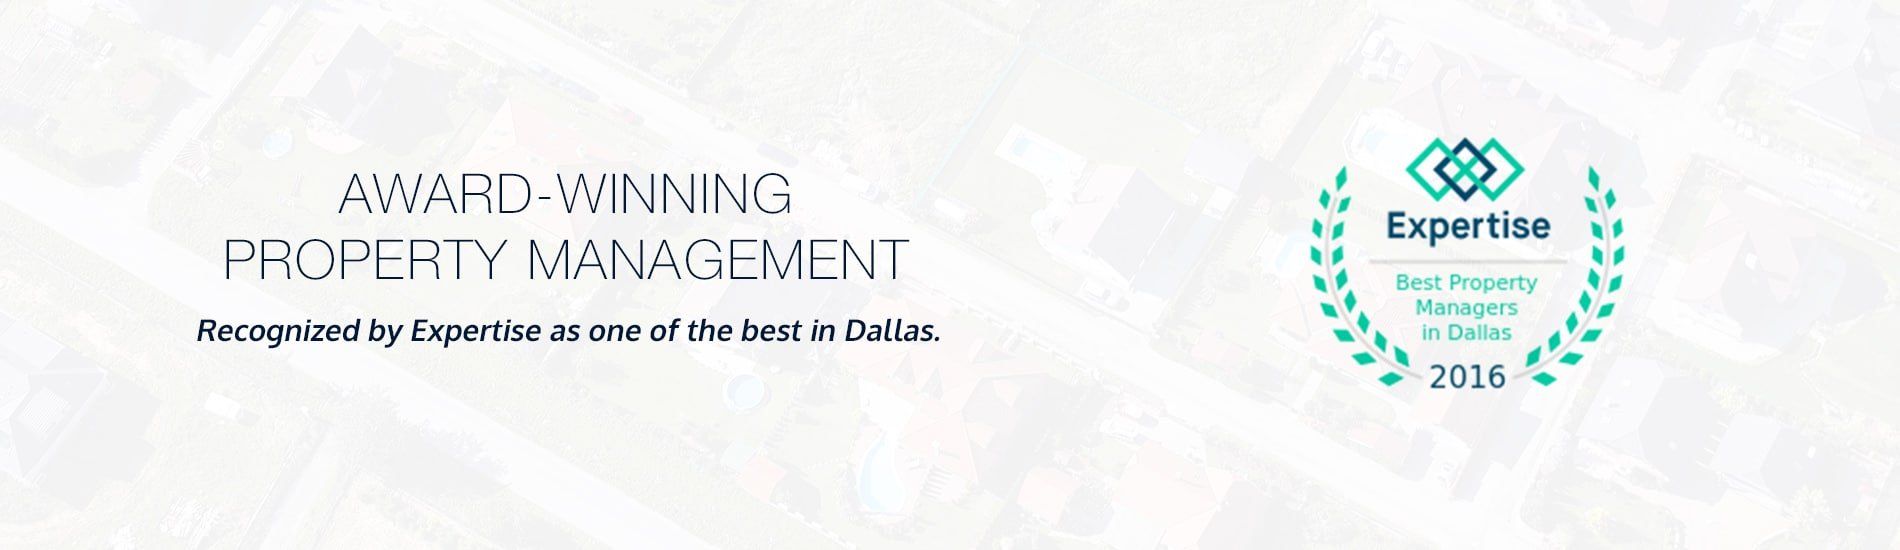 Expertise Best Property Managers in Dallas